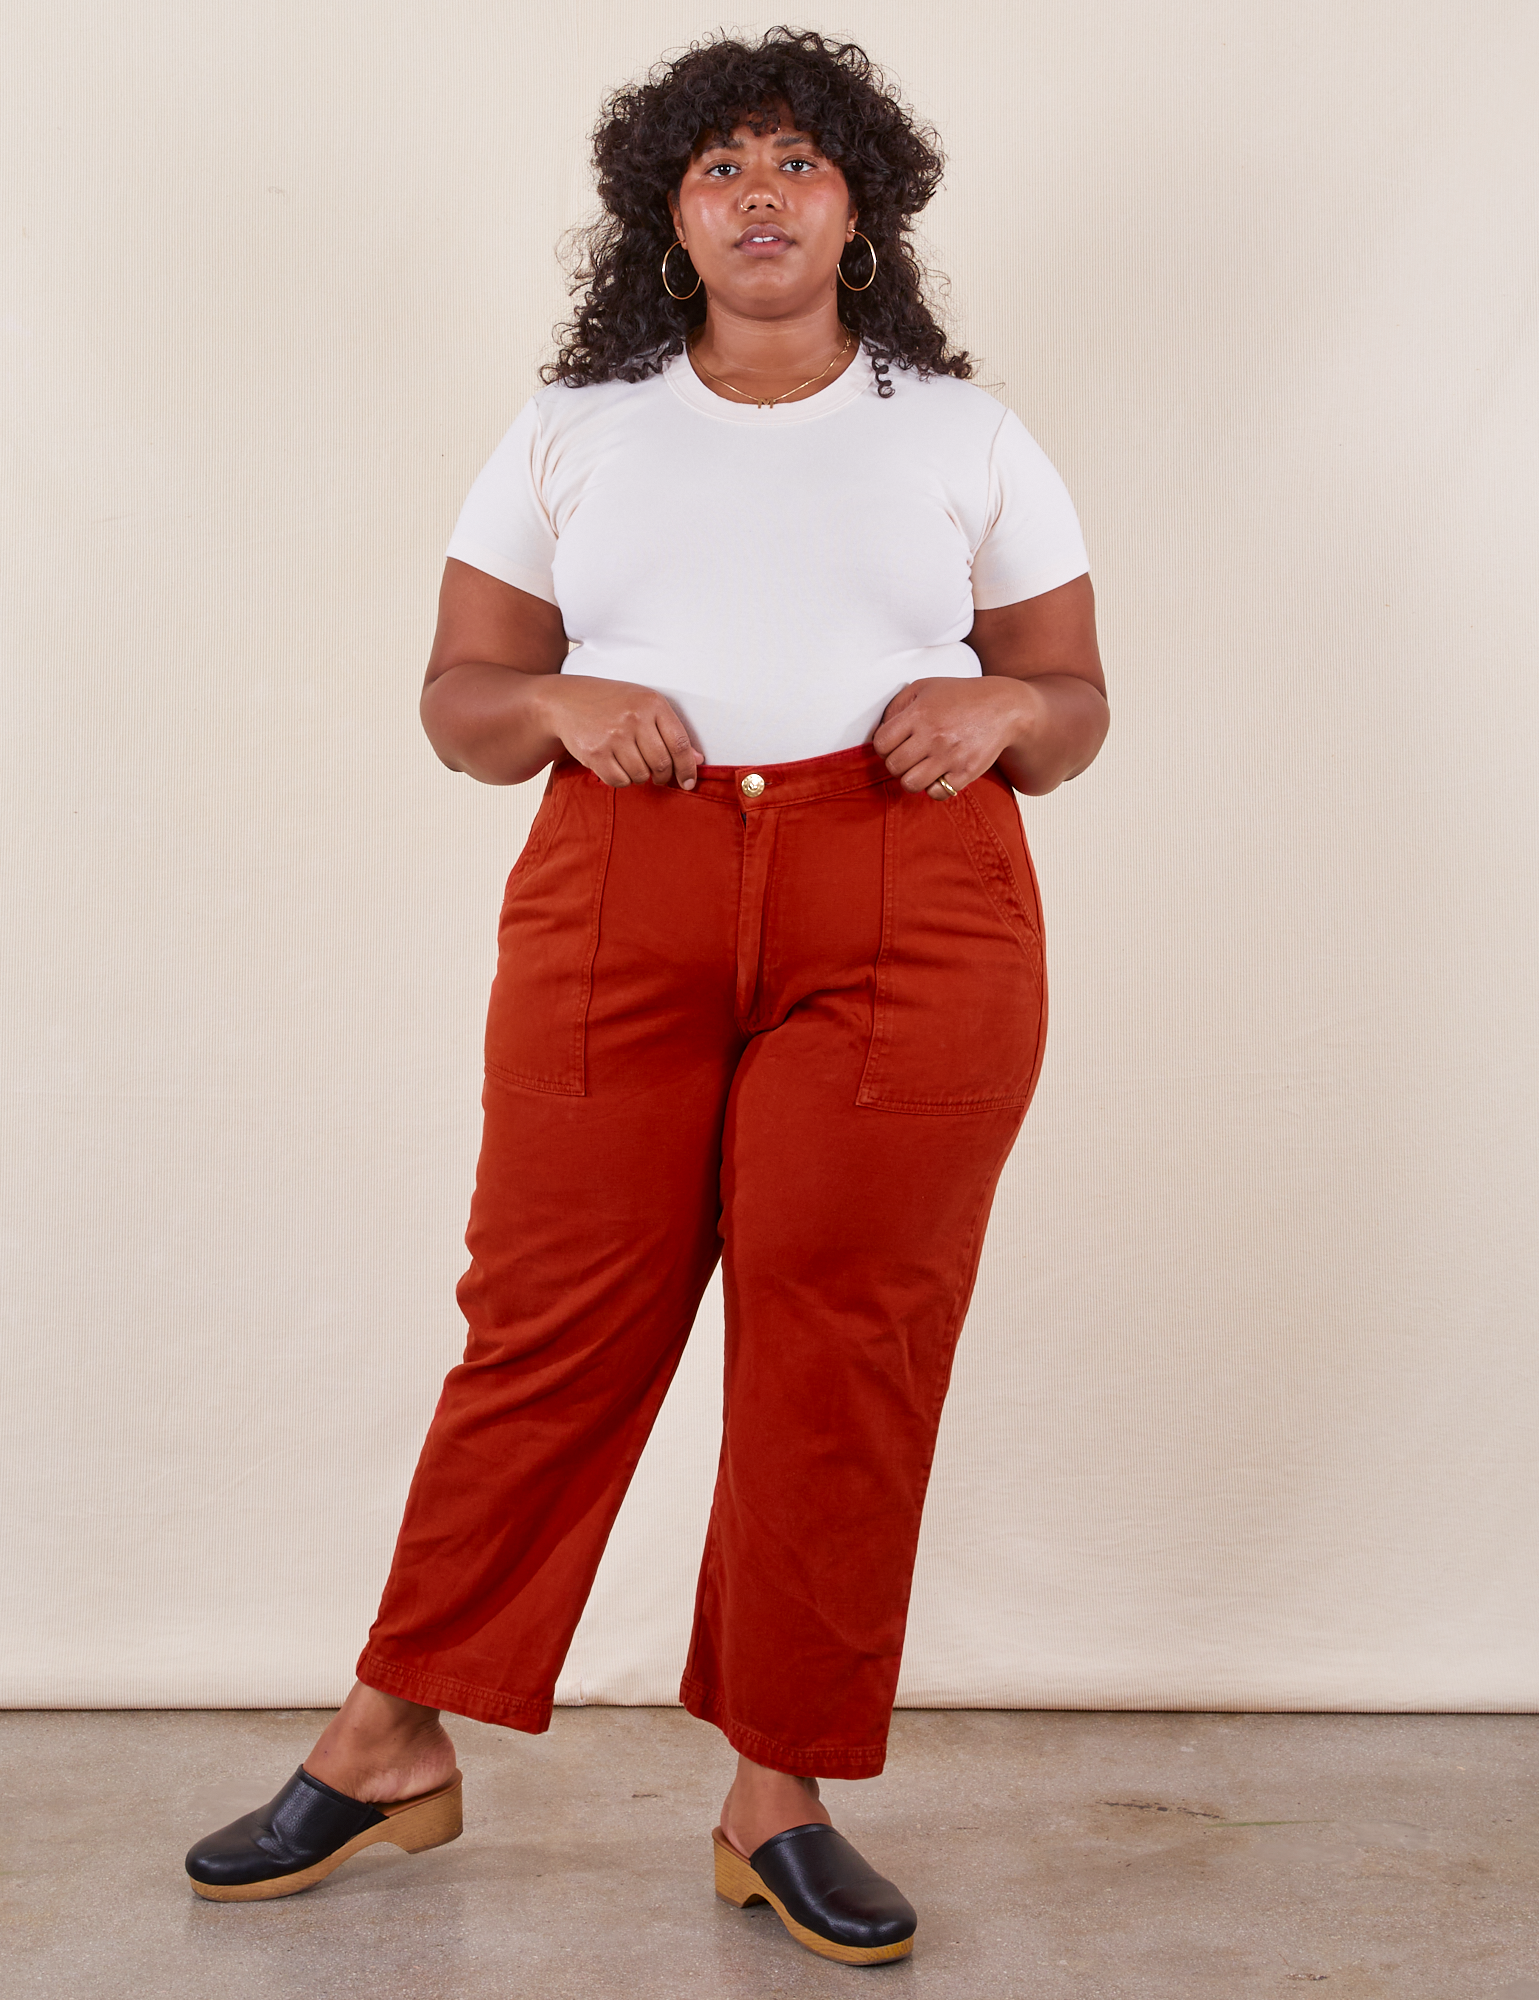 Morgan is 5&#39;5&quot; and wearing Petite 1XL Work Pants in Paprika paired with a vintage off-white Baby Tee